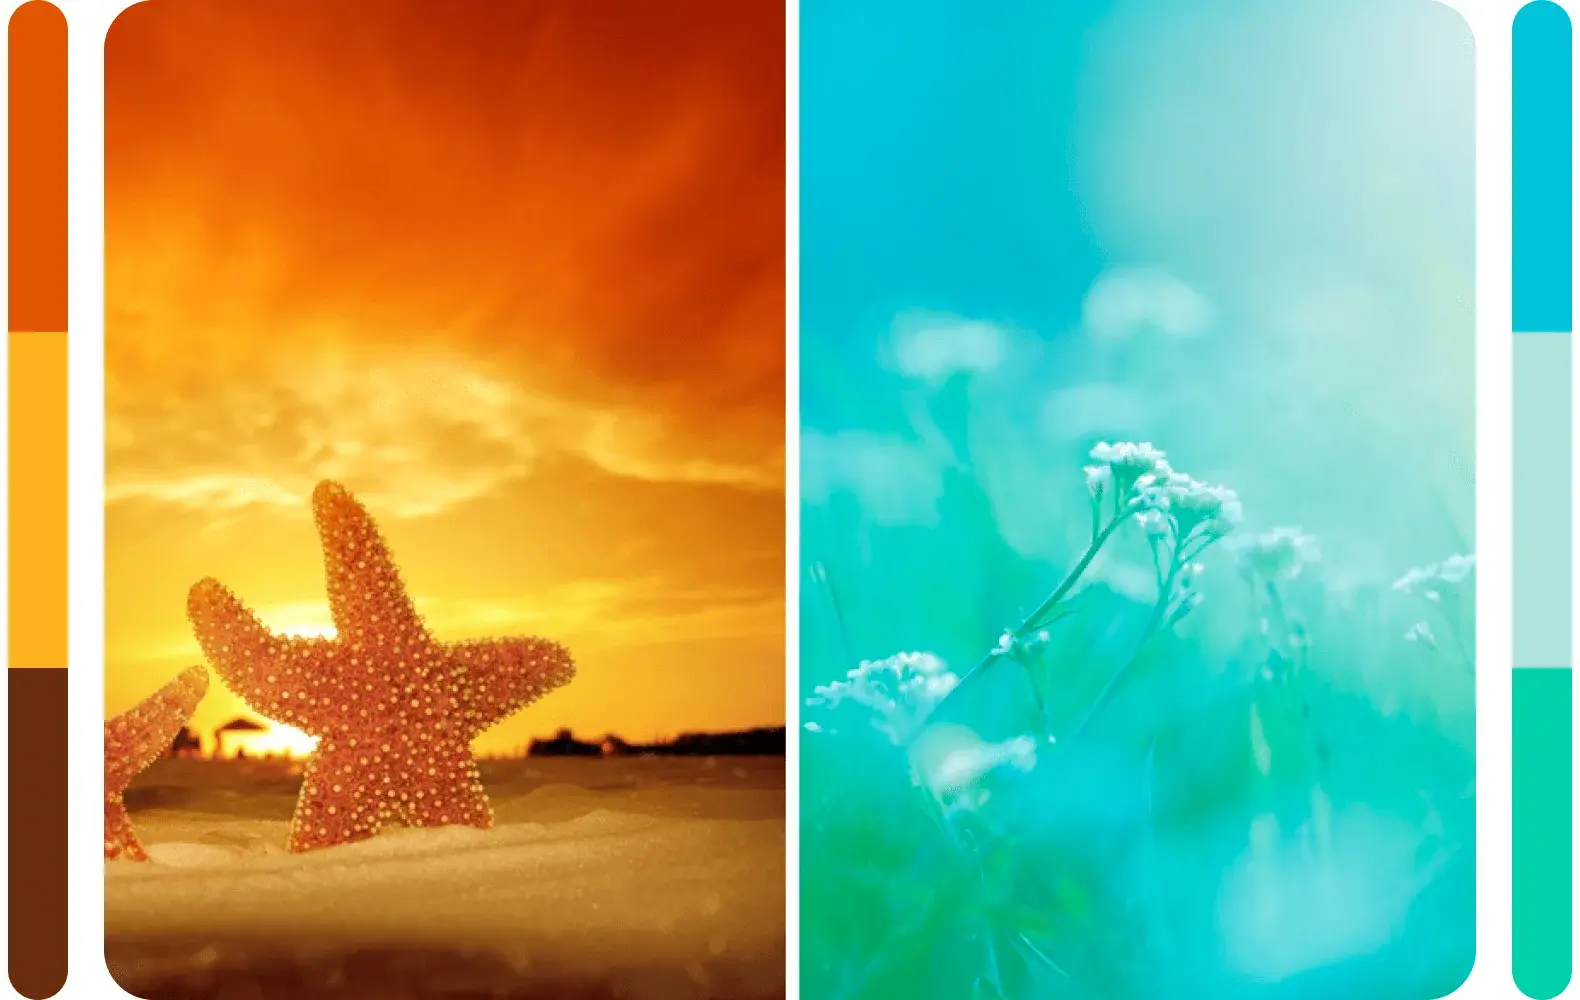 Example showing a warm image and a cool image to illustrate the different feelings that color can evoke.